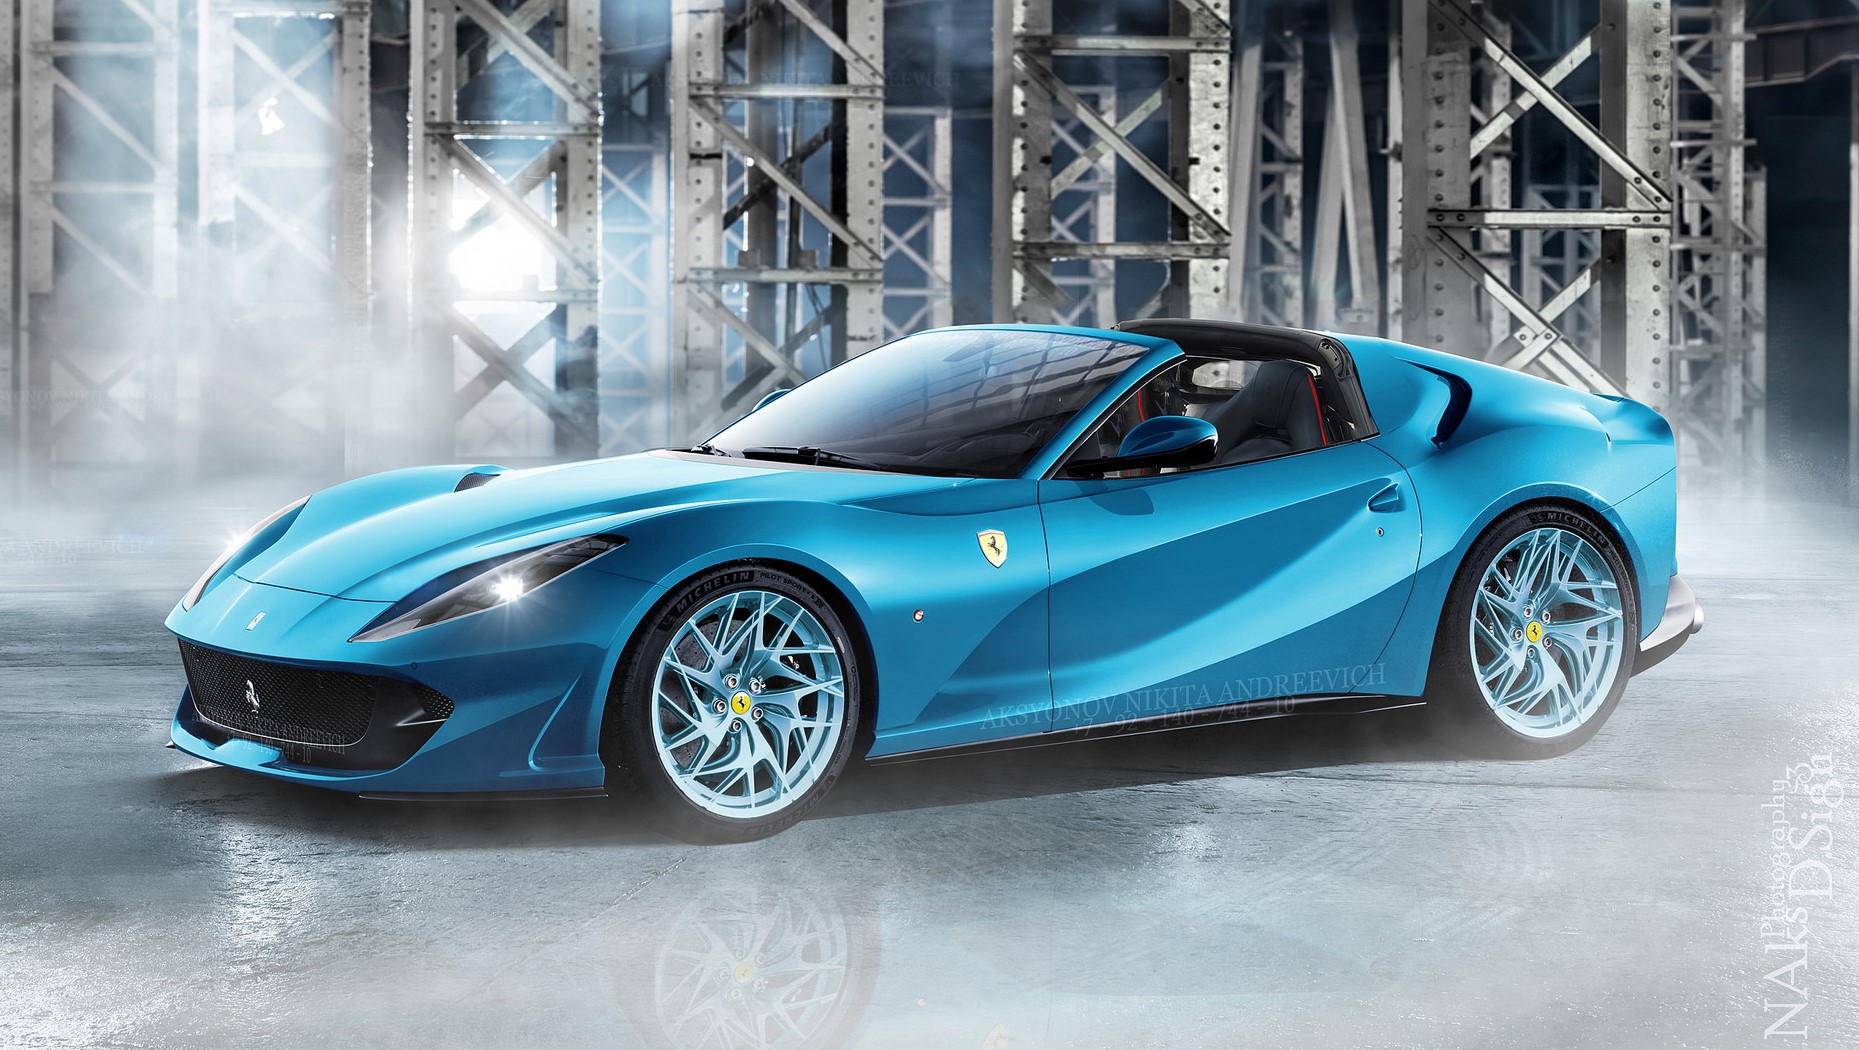 The 15 New Ferrari Models We Are Expecting And Assuming To